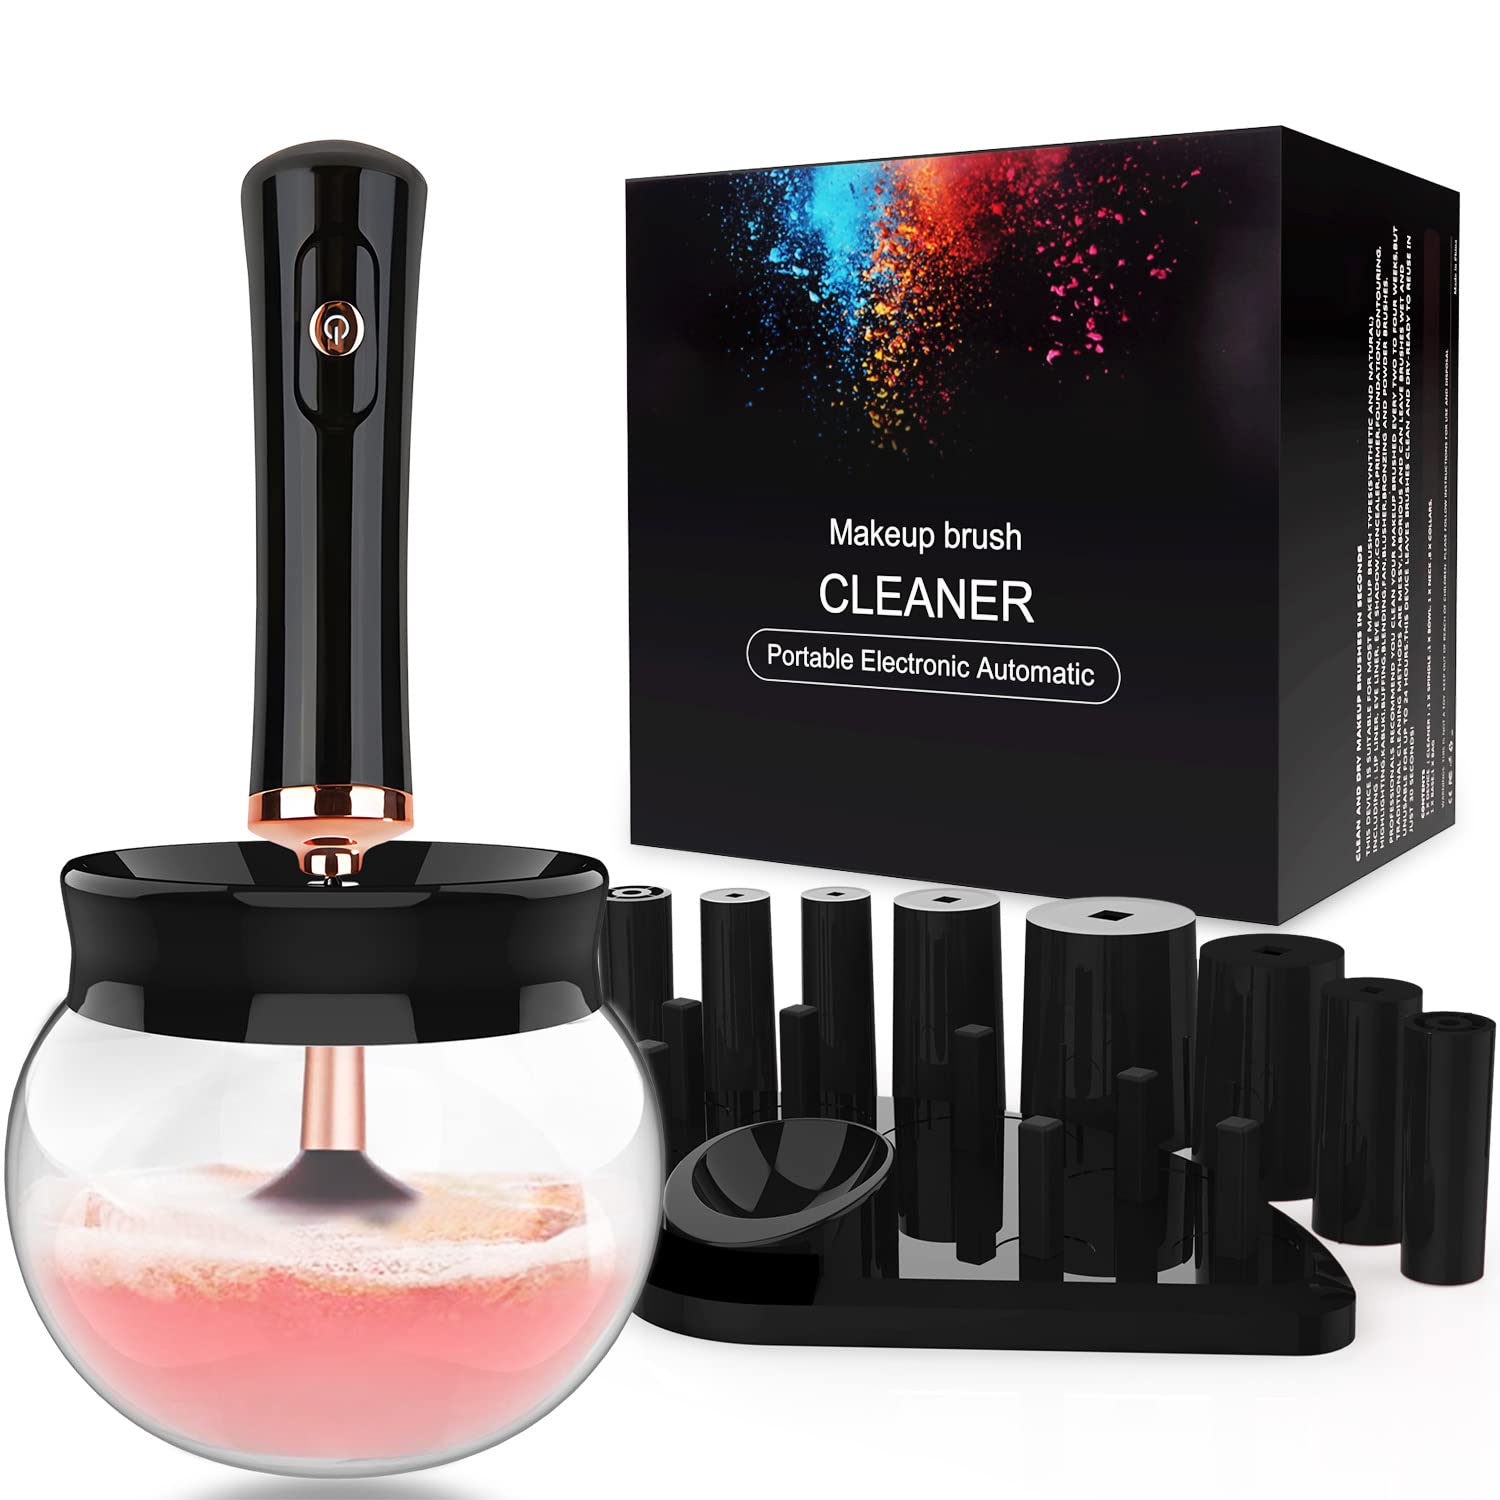  Electric Makeup Brush Cleaner- Catcan Make Up Brush Cleaner  Machine for Portable Automatic USB Cosmetic Brush Cleaner Tools, Brush  Cleaner Spinner for All Size Beauty Makeup Brushes : Beauty & Personal